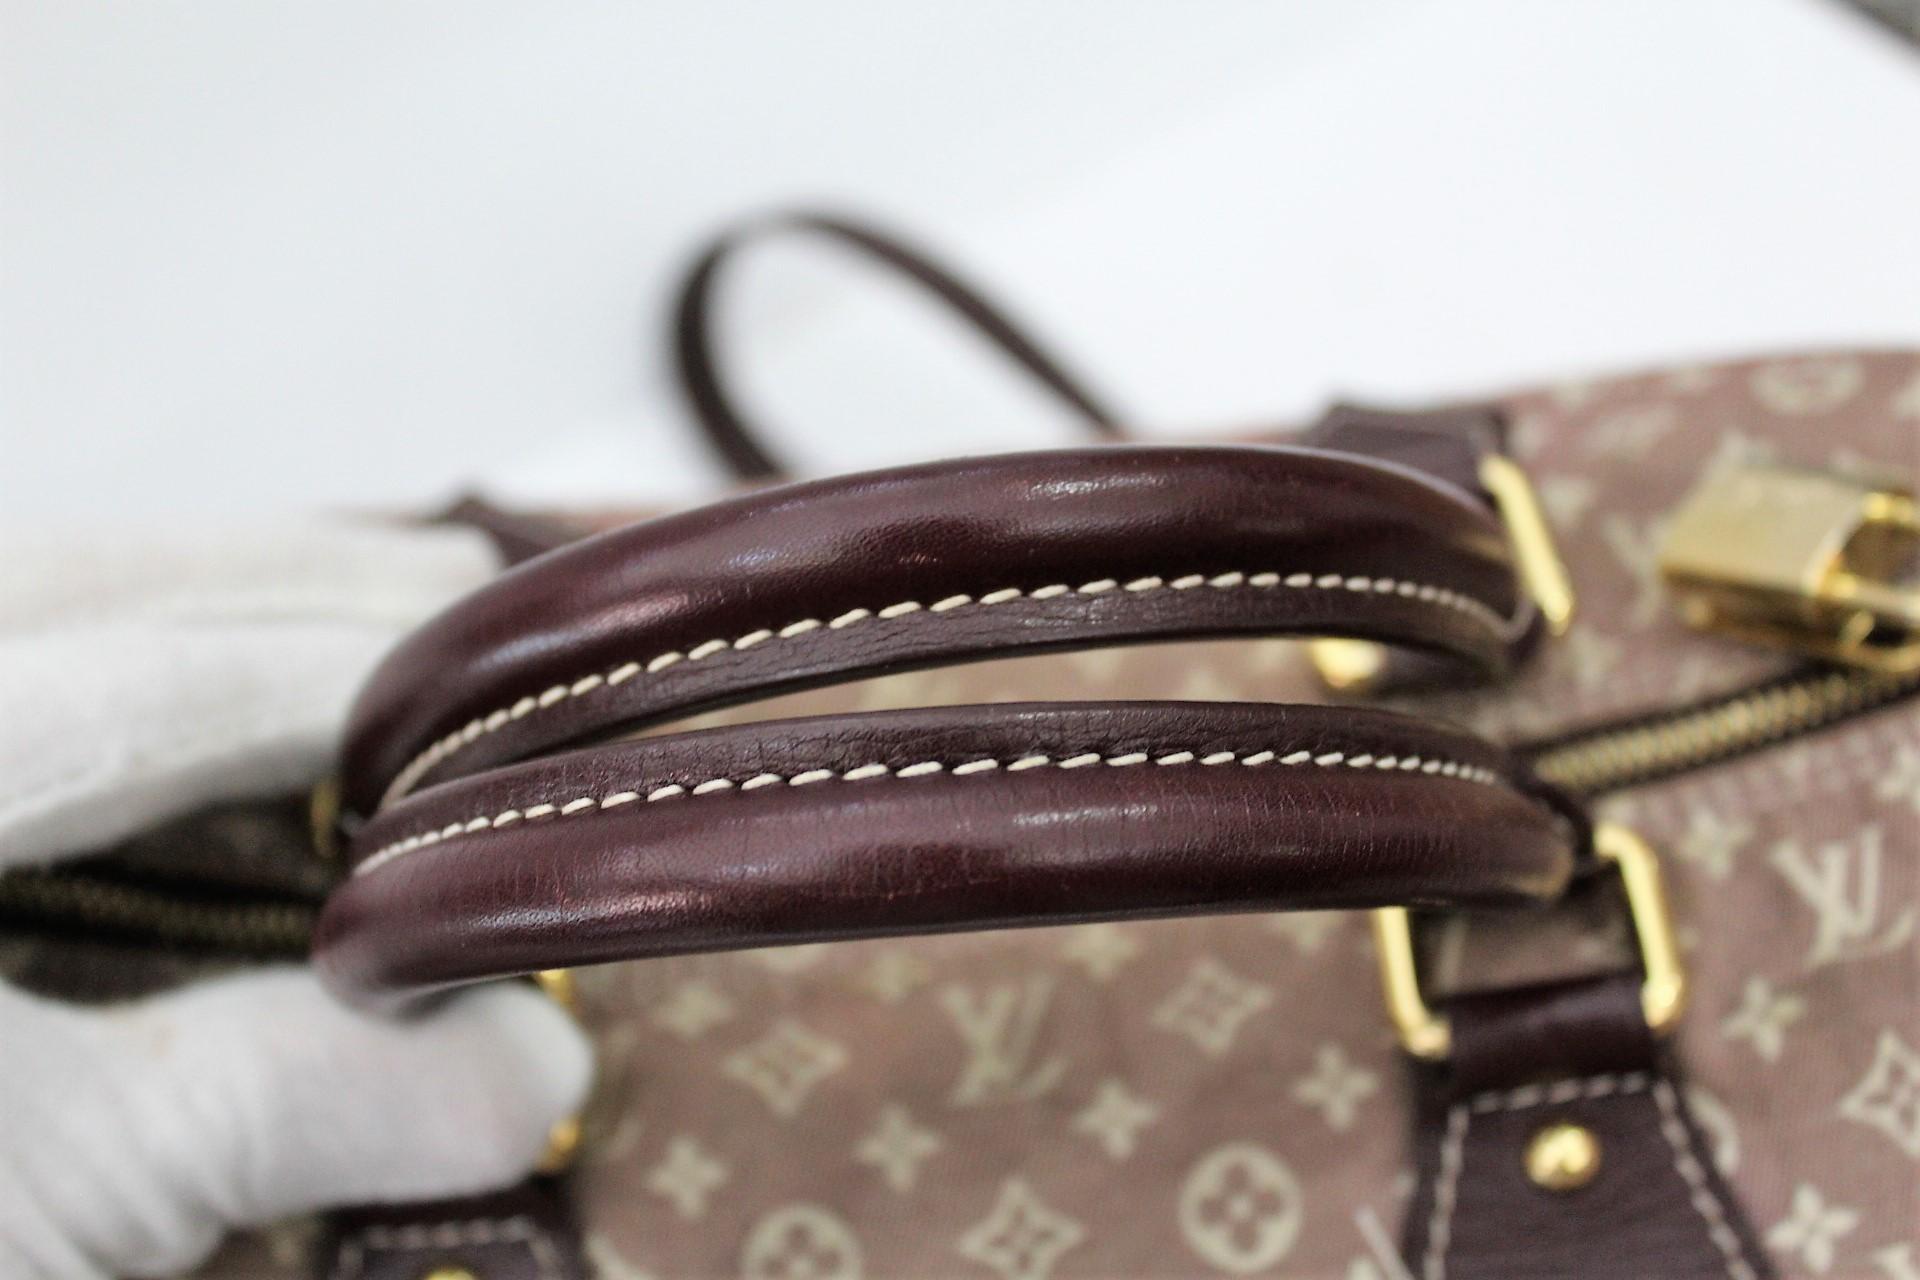 A sporty and sophisticated blend makes this Louis Vuitton Sepia Monogram Idylle Speedy bag
really desirable. With its ultra-spacious interiors and hinged lock with gold padlock,
you can lock all your precious objects and take them wherever you